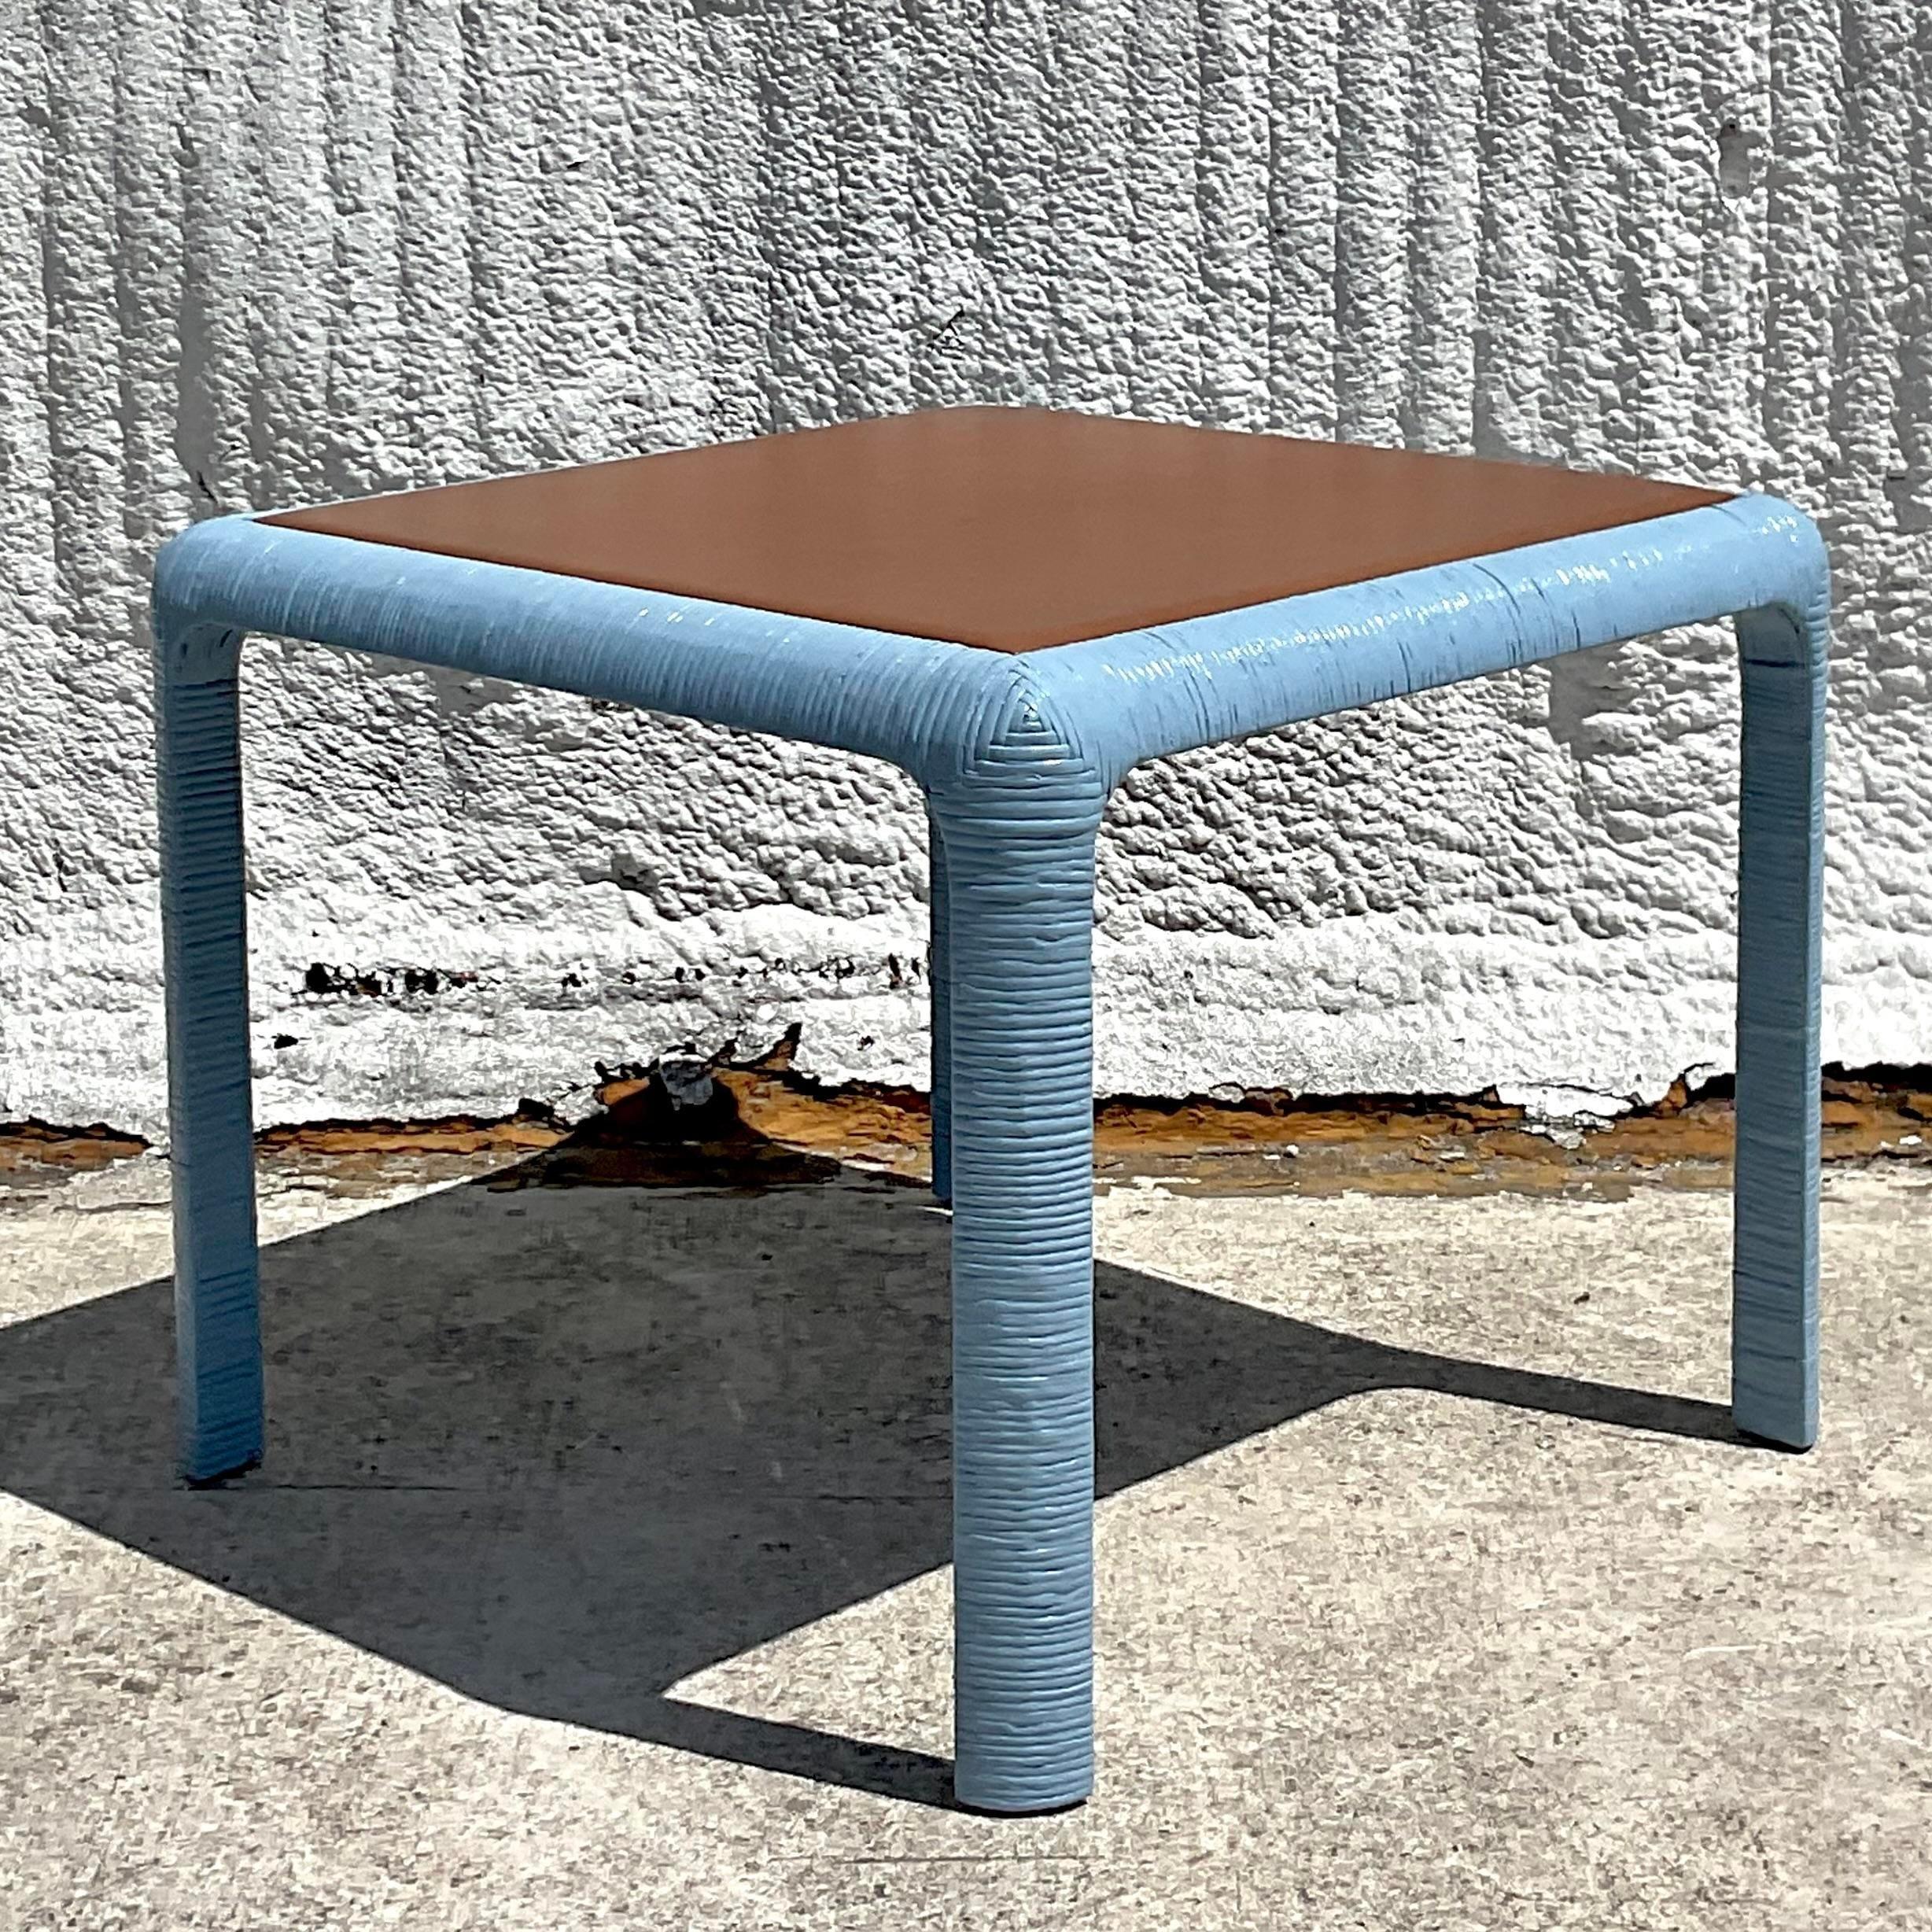 An exceptional vintage z coastal game table. Custom designed by the legendary Scott z sanders for the 2023 Kips Bay Palm Beach Showhouse. Beautiful wrapped rattan with a chic caramel leather top. The most beautiful blue lacquered finish. A real